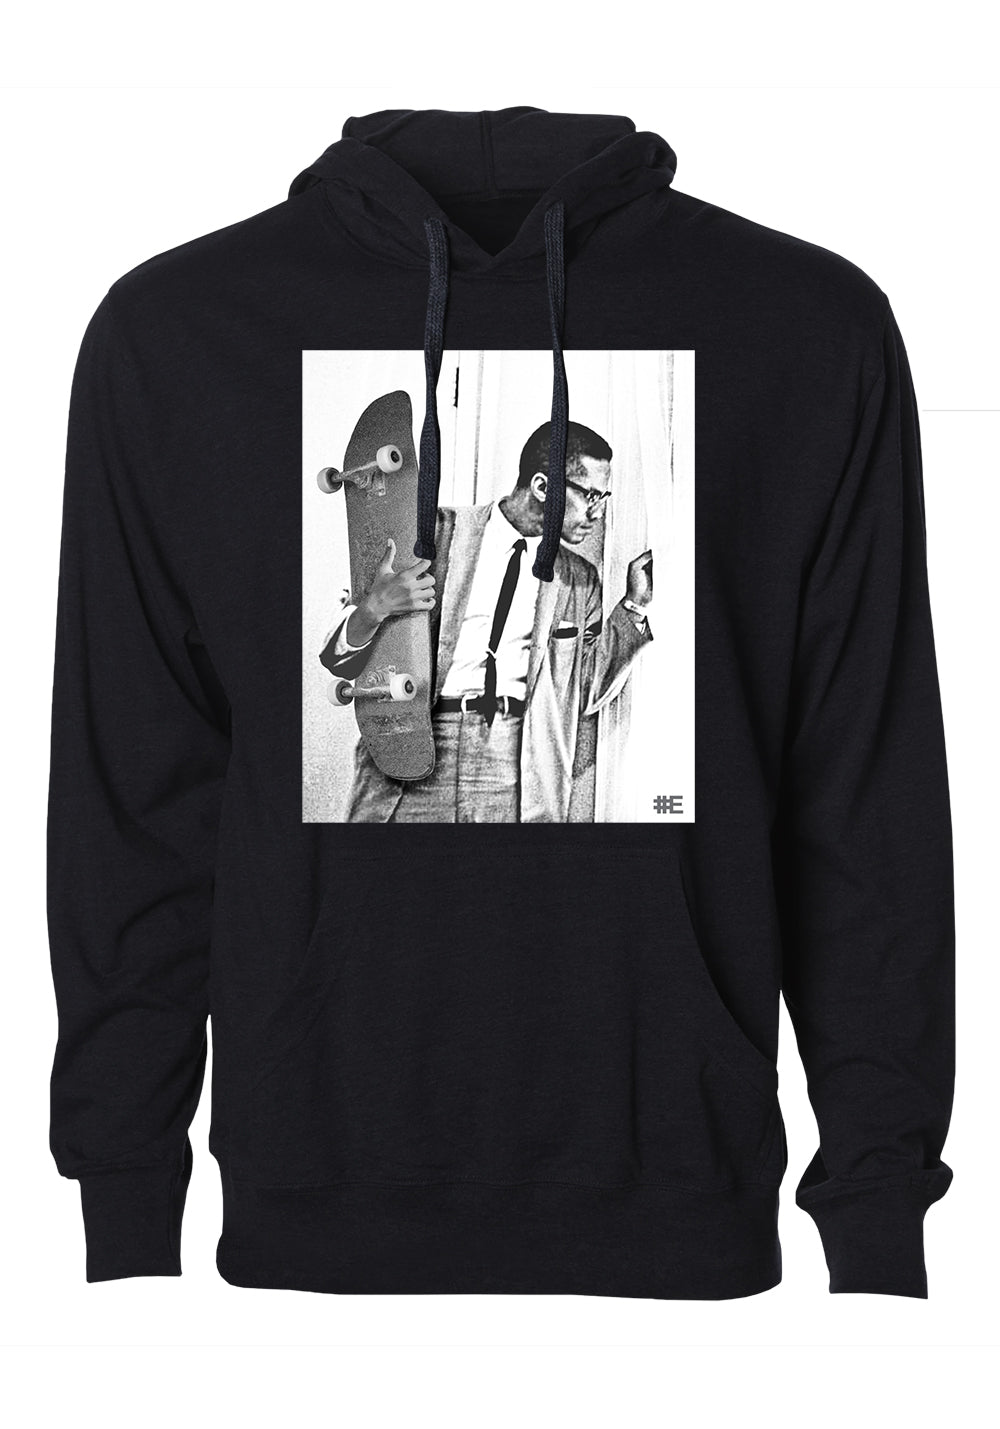 Means Graphic Hoodie